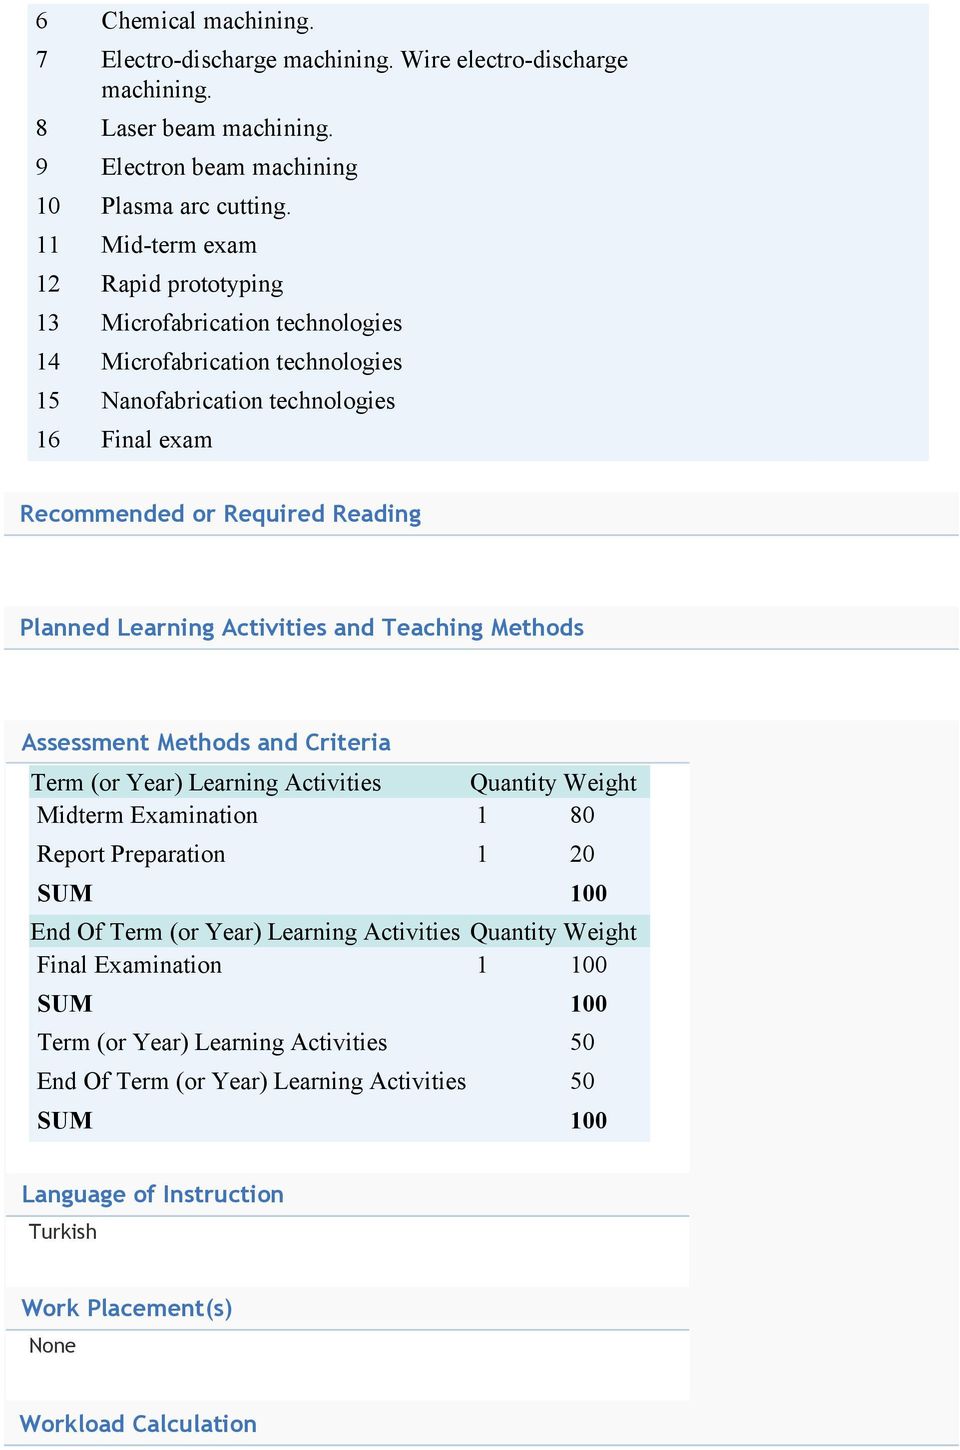 Learning Activities and Teaching Methods Assessment Methods and Criteria Term (or Year) Learning Activities Quantity Weight Midterm Examination 1 80 Report Preparation 1 20 SUM 100 End Of Term (or